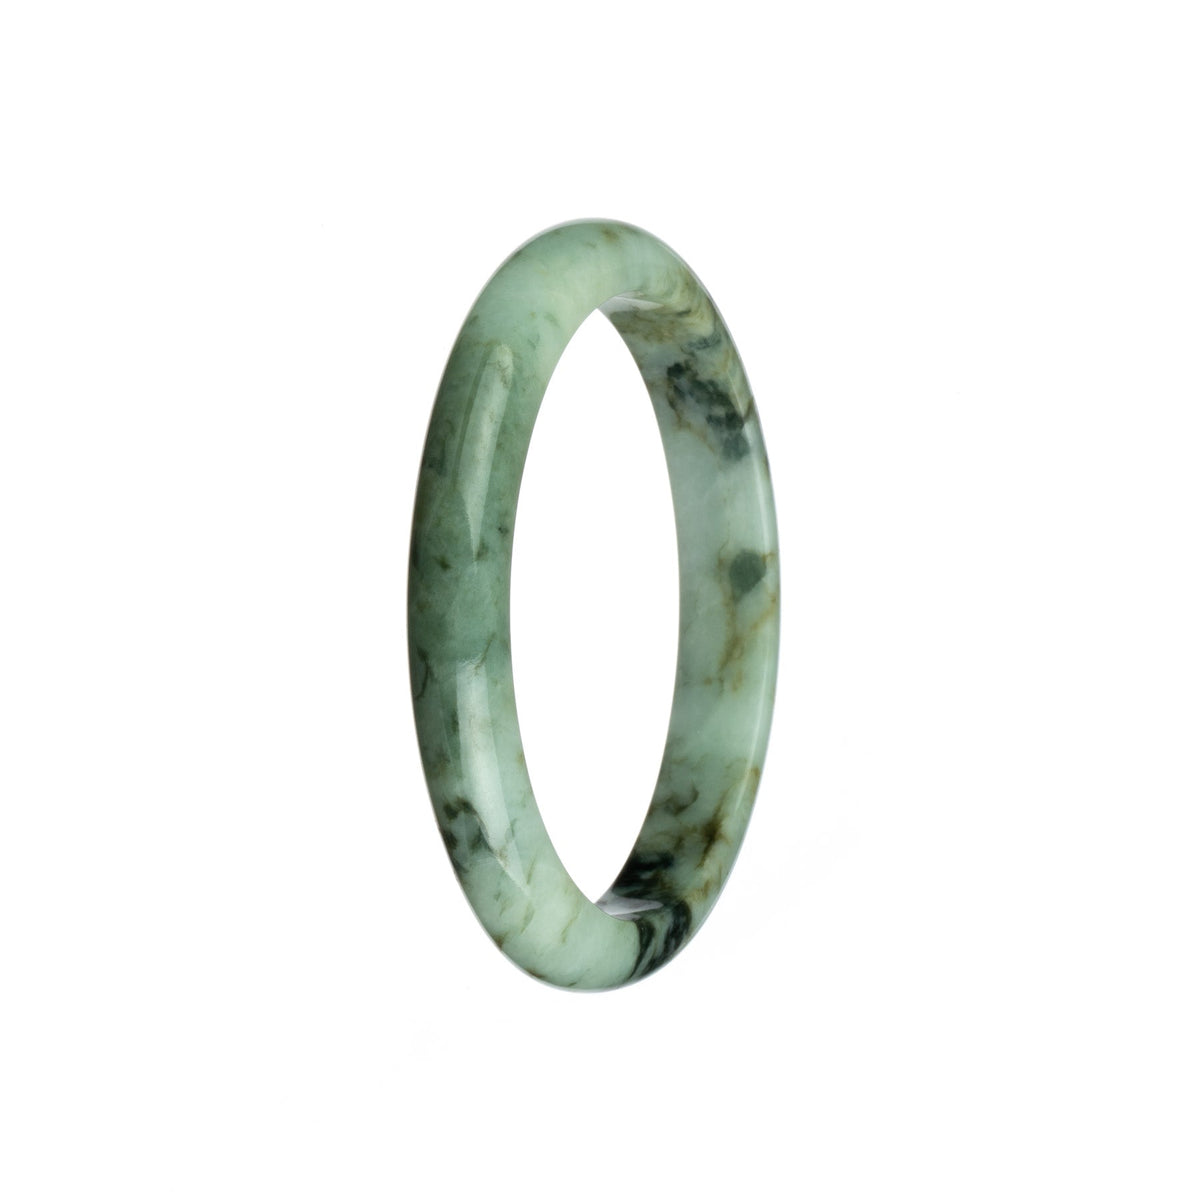 A close-up image of an authentic natural white Burma jade bangle bracelet with a green and black pattern. The bracelet is semi-round and has a diameter of 58mm. Created by MAYS GEMS.